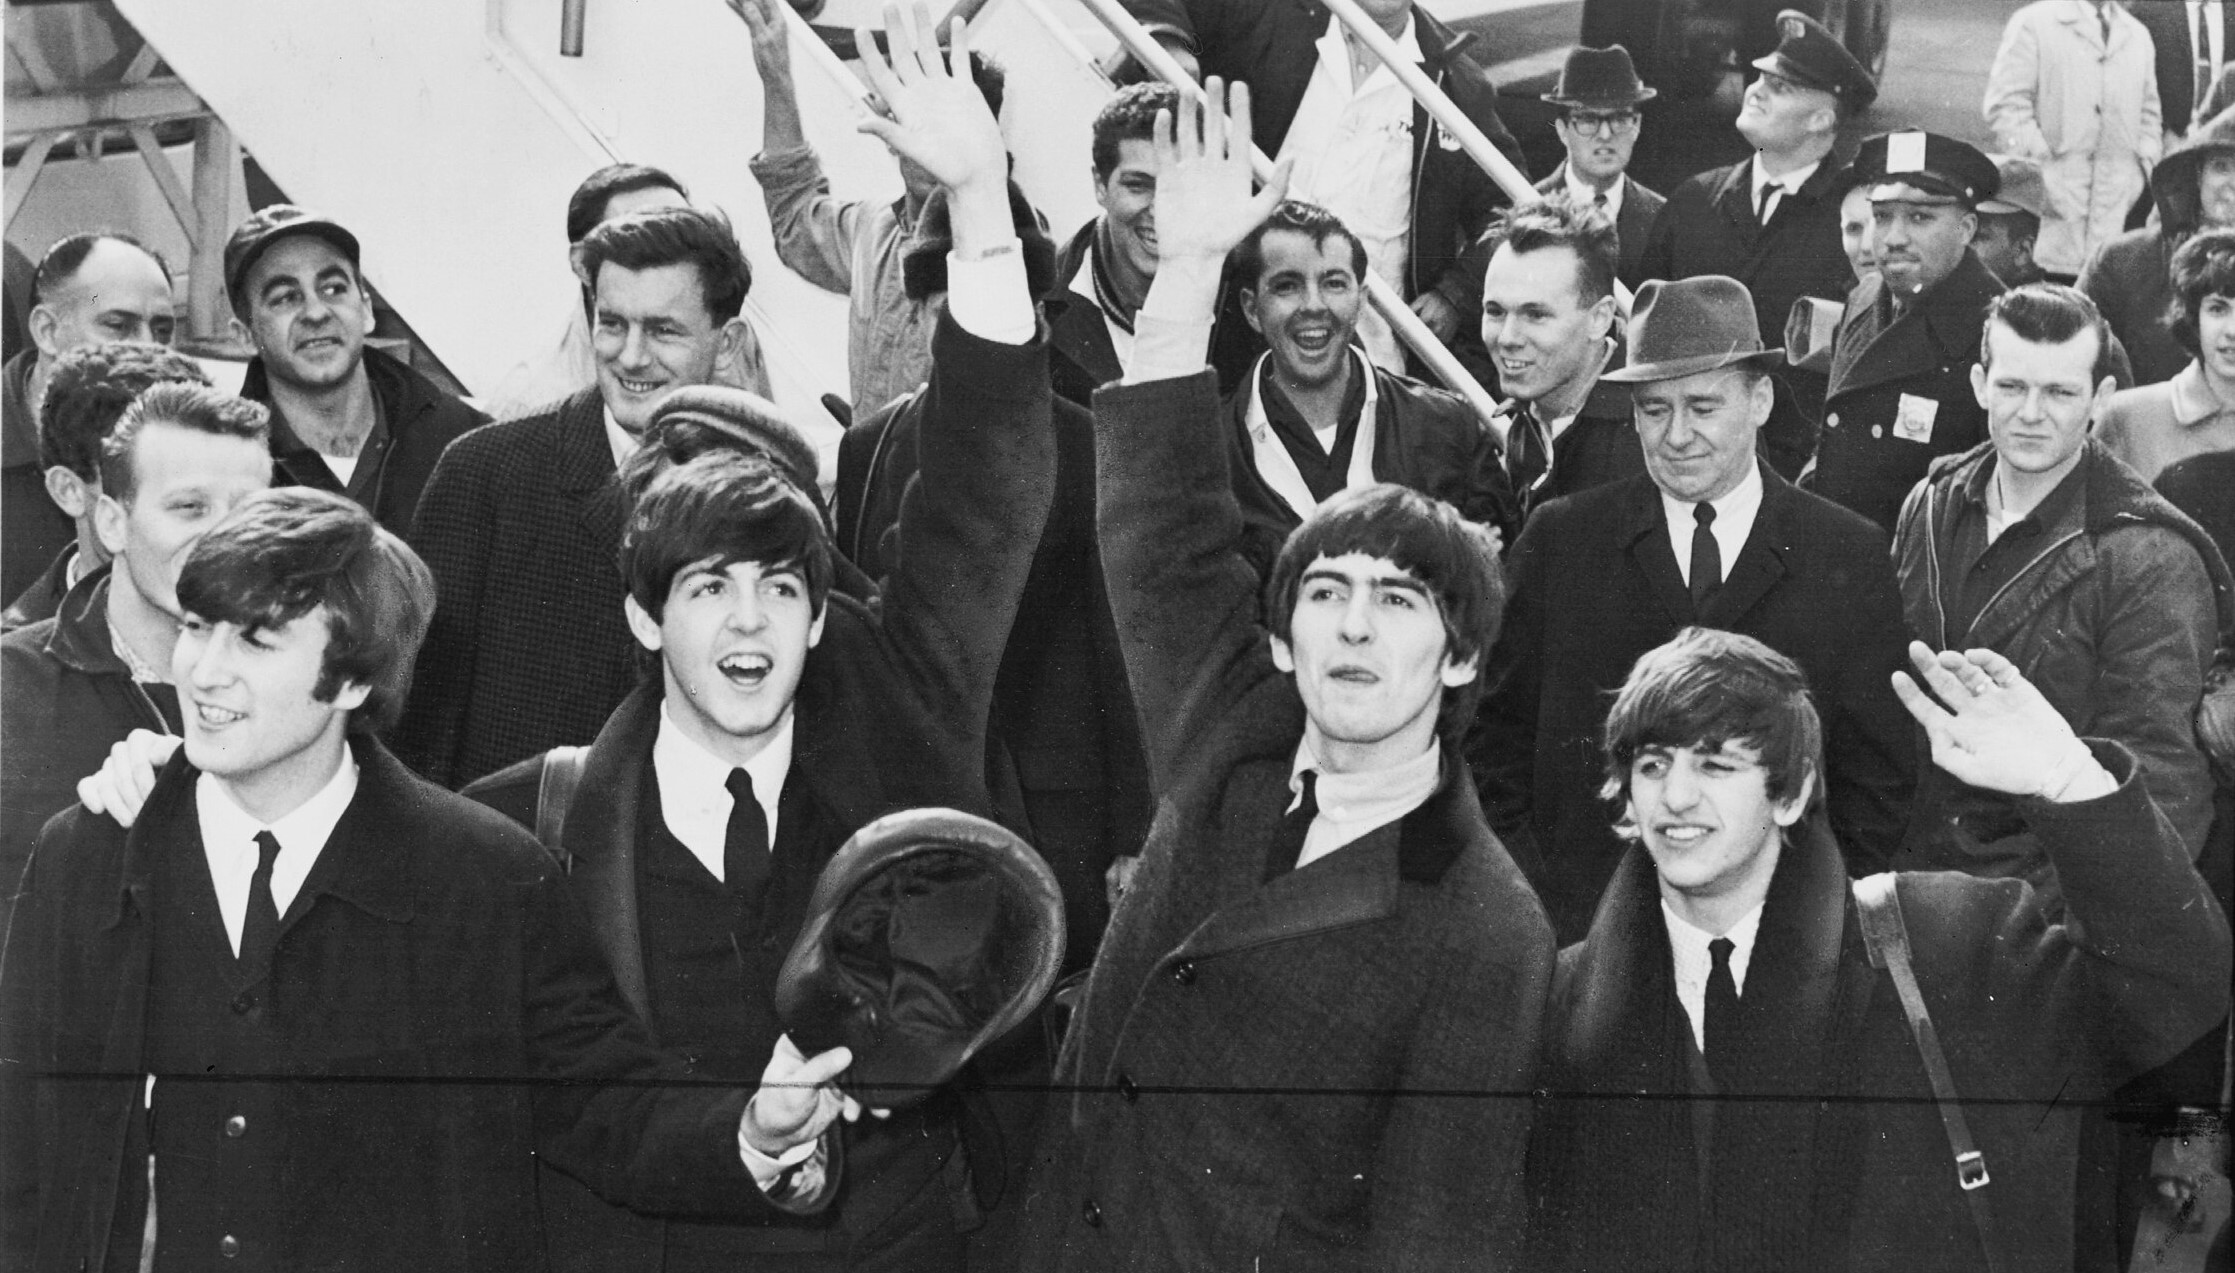 The Beatles, upon their arrival at Kennedy International Airport in New York City on February 7,1964.